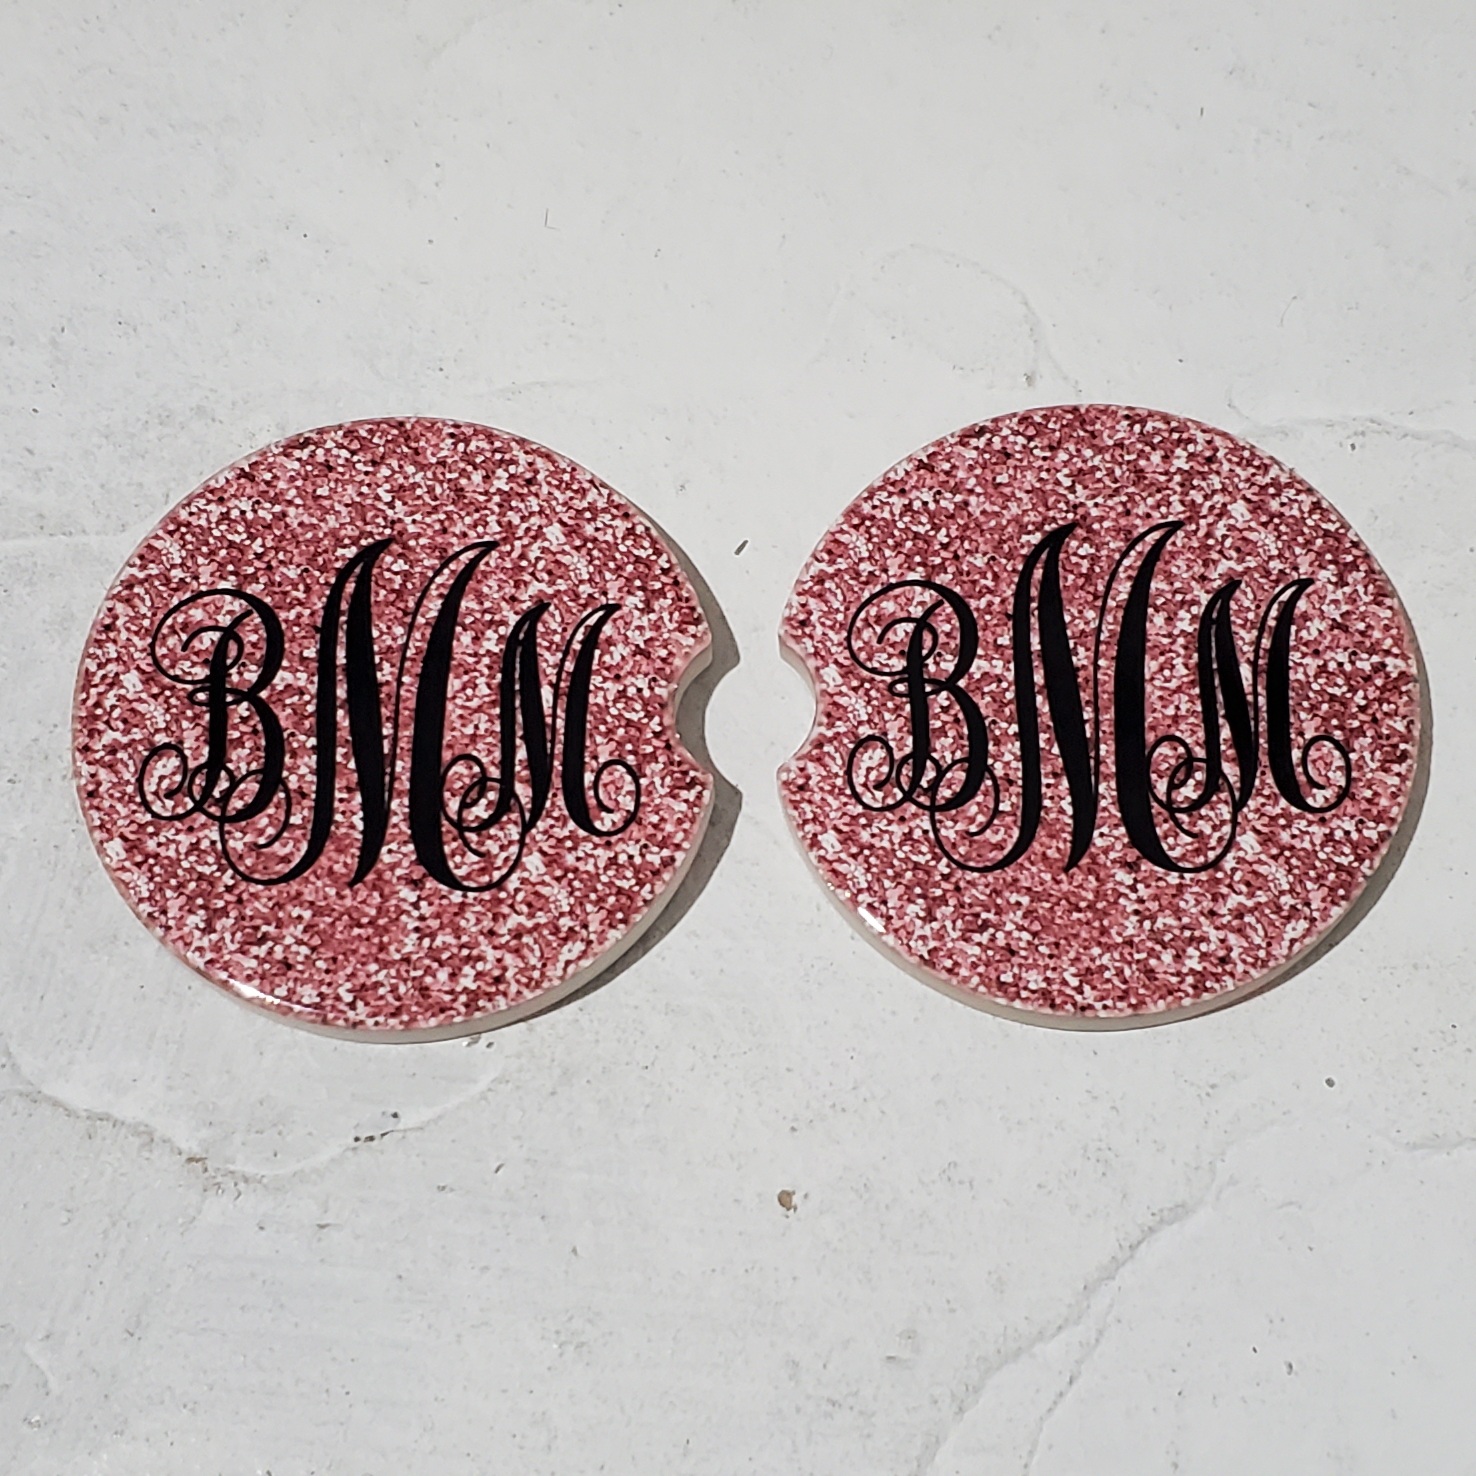 Monogram Coasters made with sublimation printing